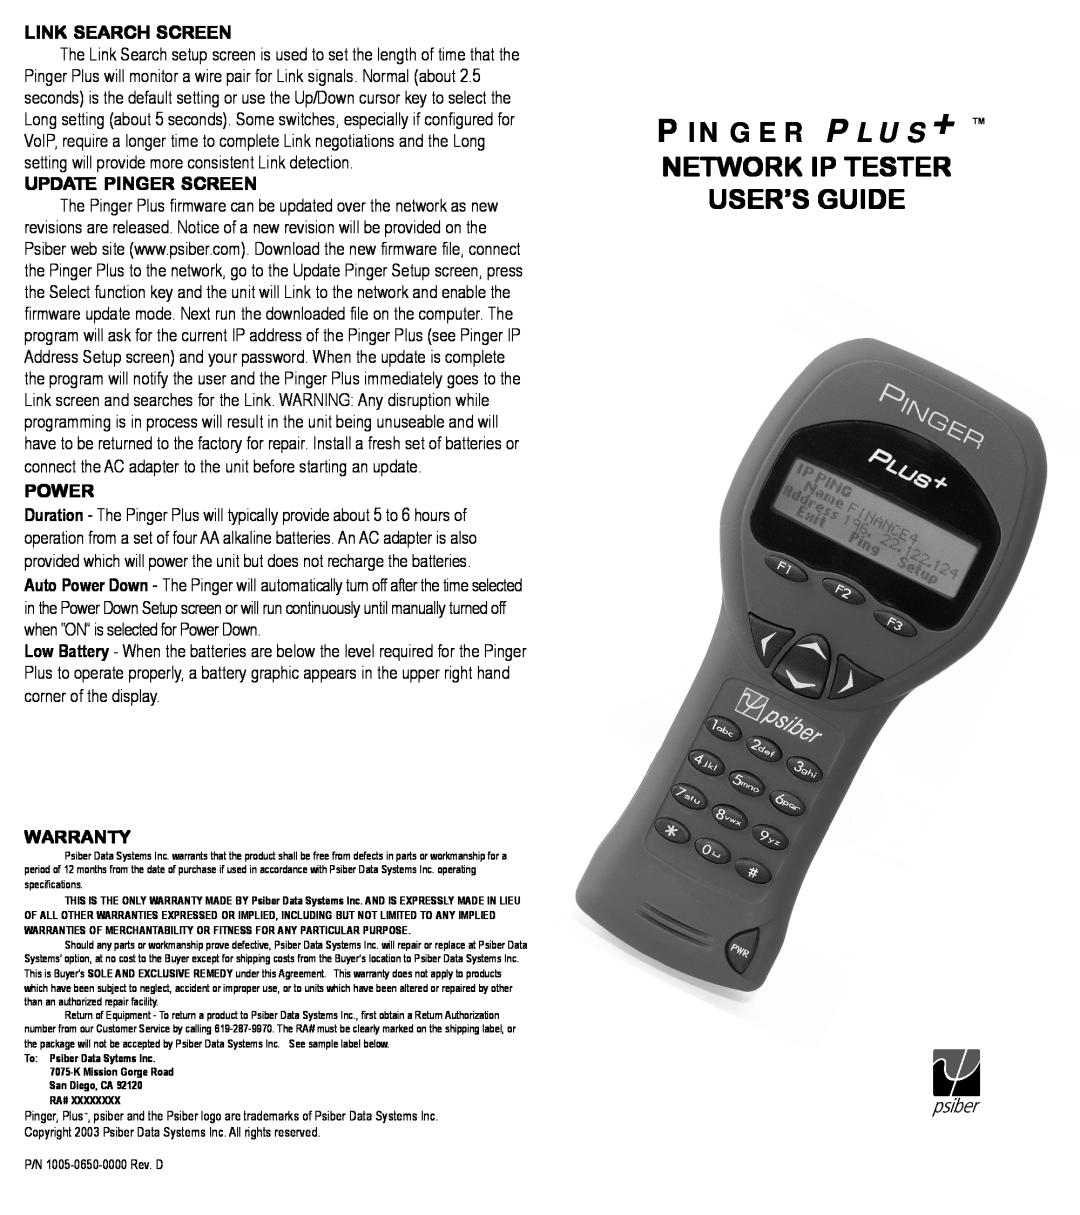 Psiber Data Systems PINGER warranty Pinger Plus+ Tm Network Ip Tester User’S Guide, Link Search Screen, Power, Warranty 